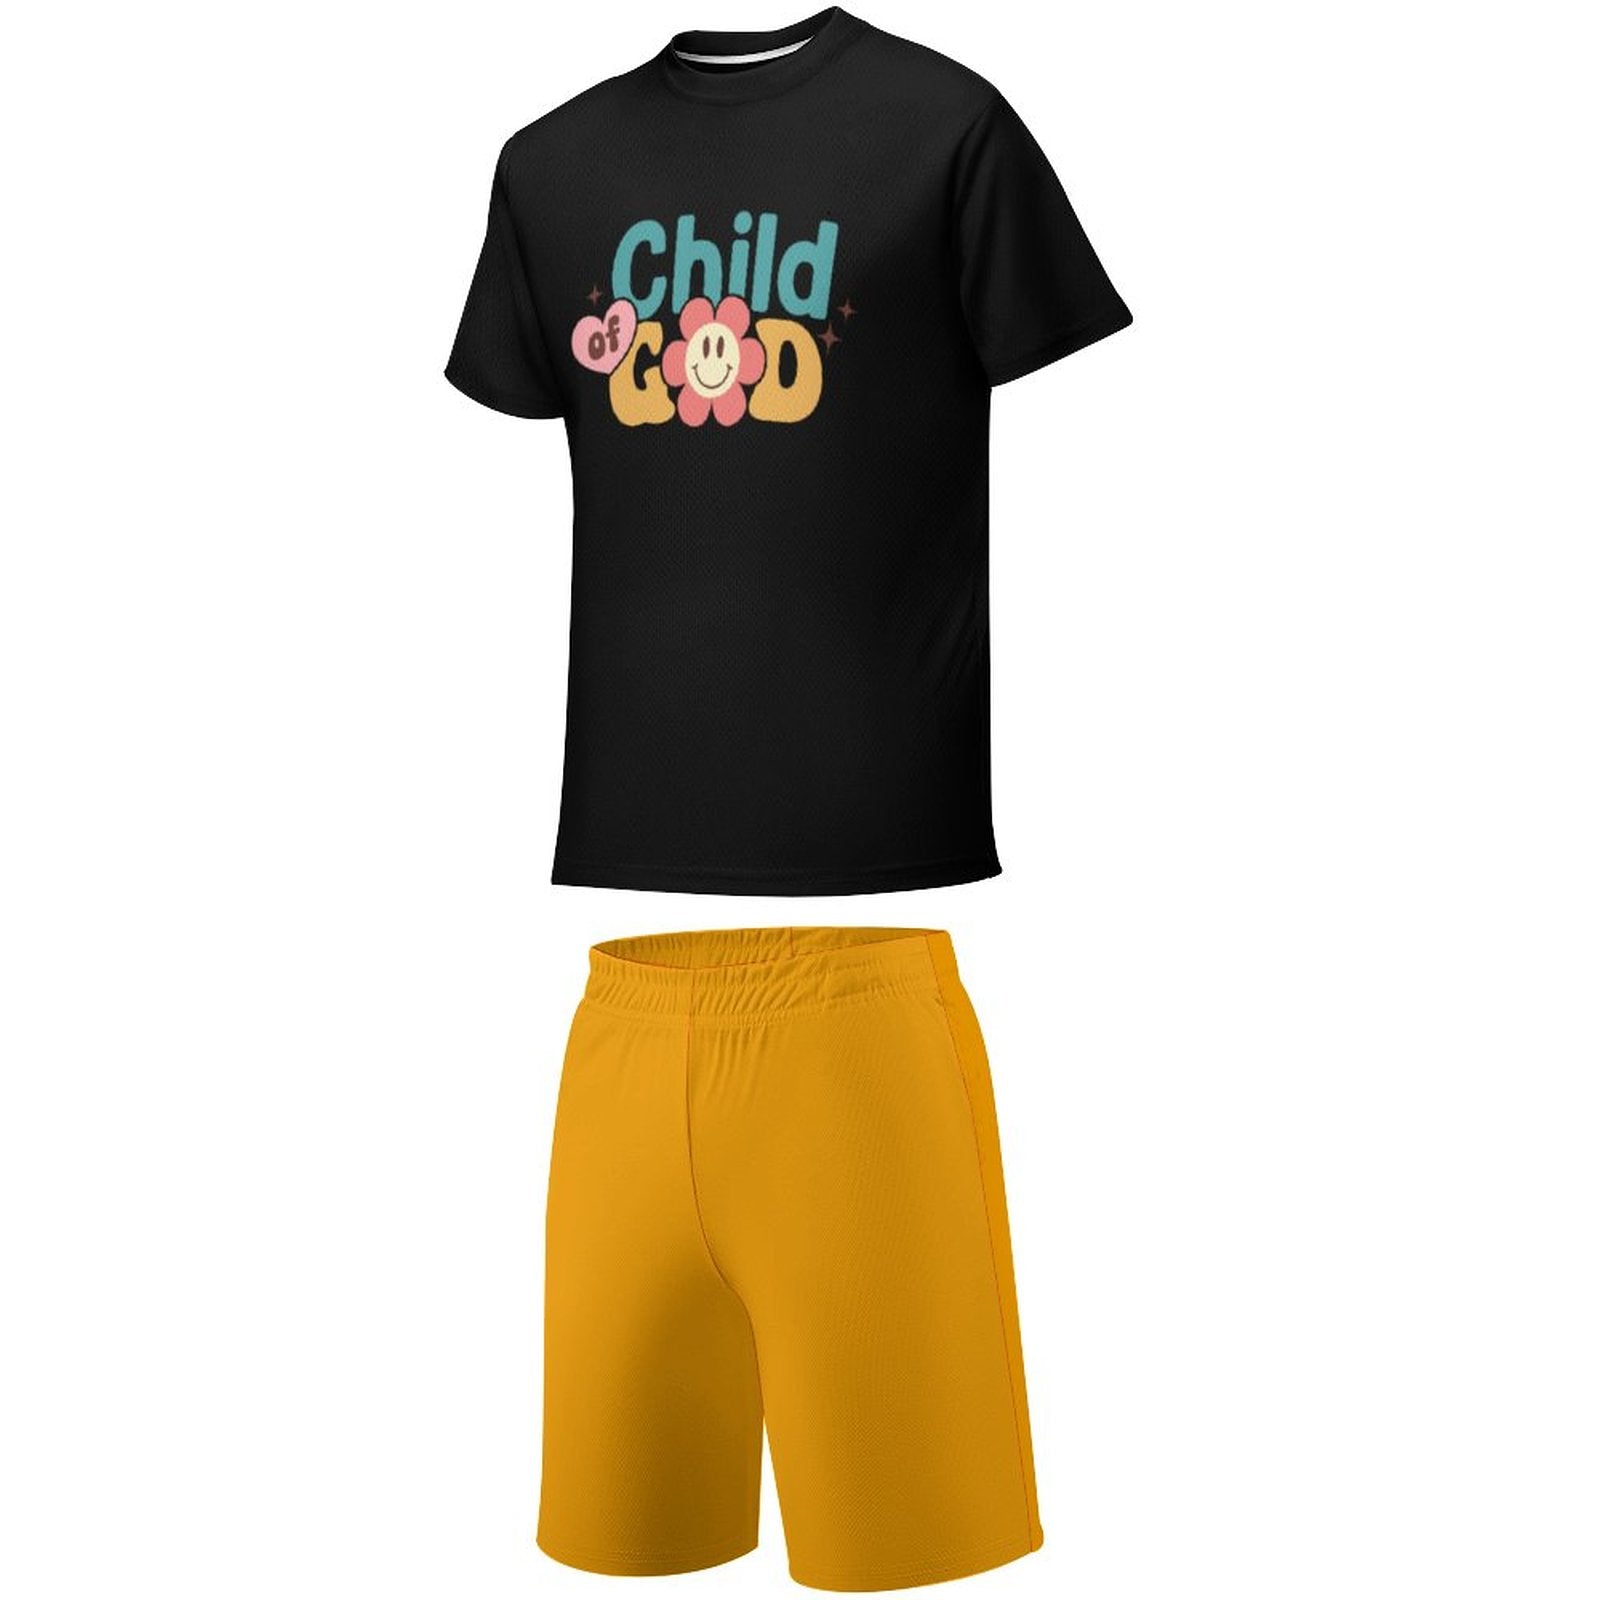 Child Of God Youth Christian Casual Shorts Set SALE-Personal Design